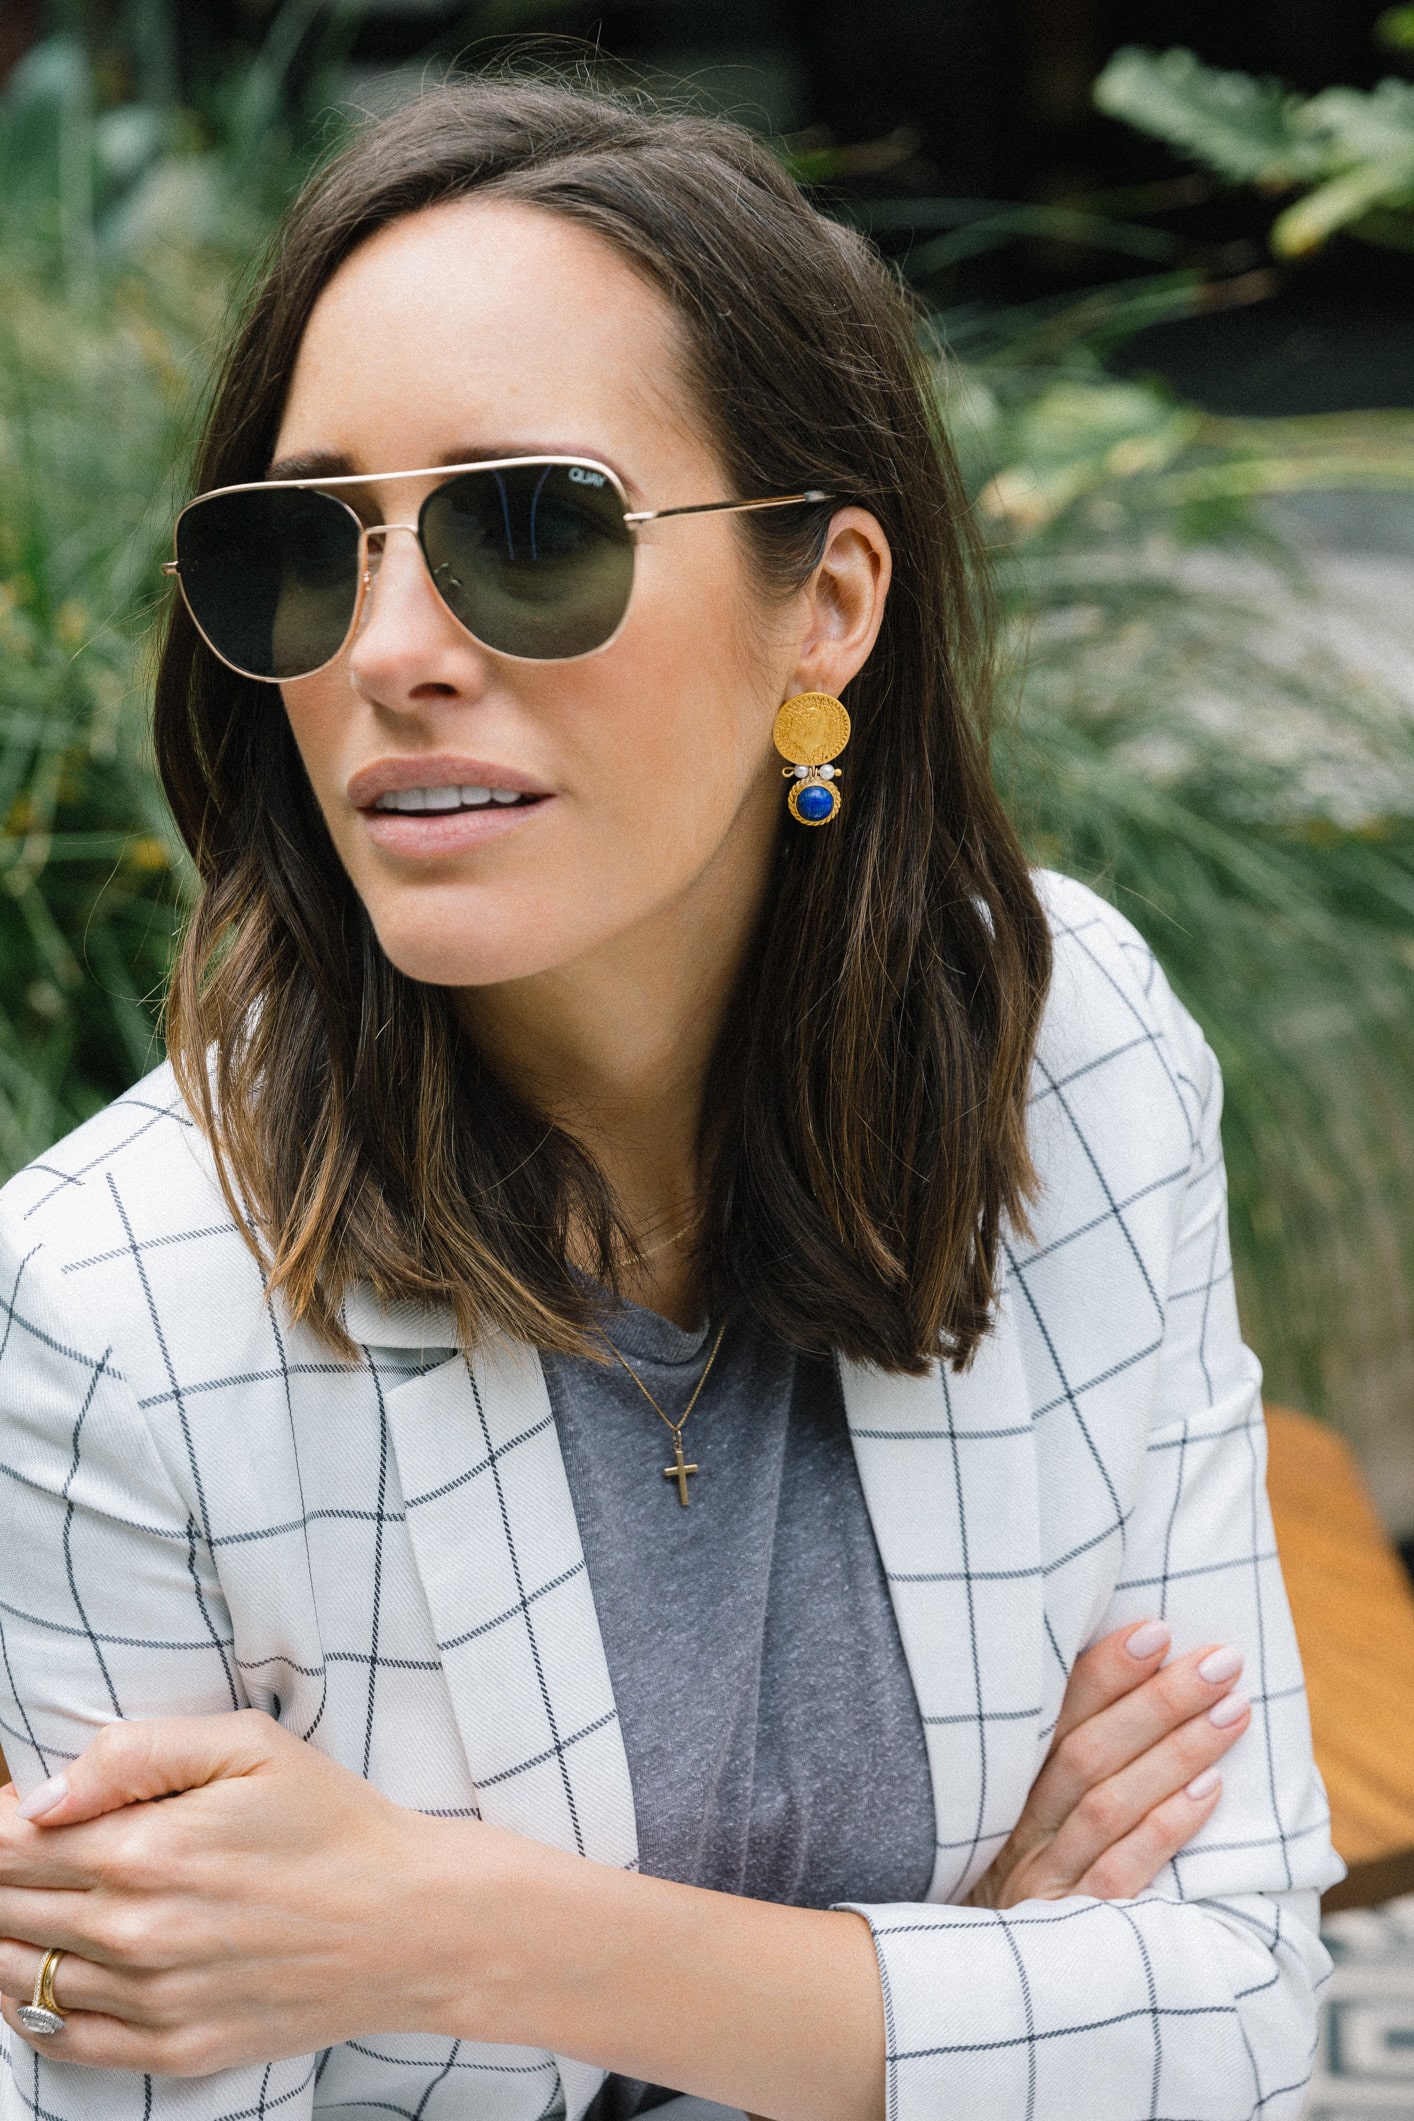 Louise Roe Wearing Spring Wardrobe Staples Chriselle Lim Blazer White Jeans And Flats